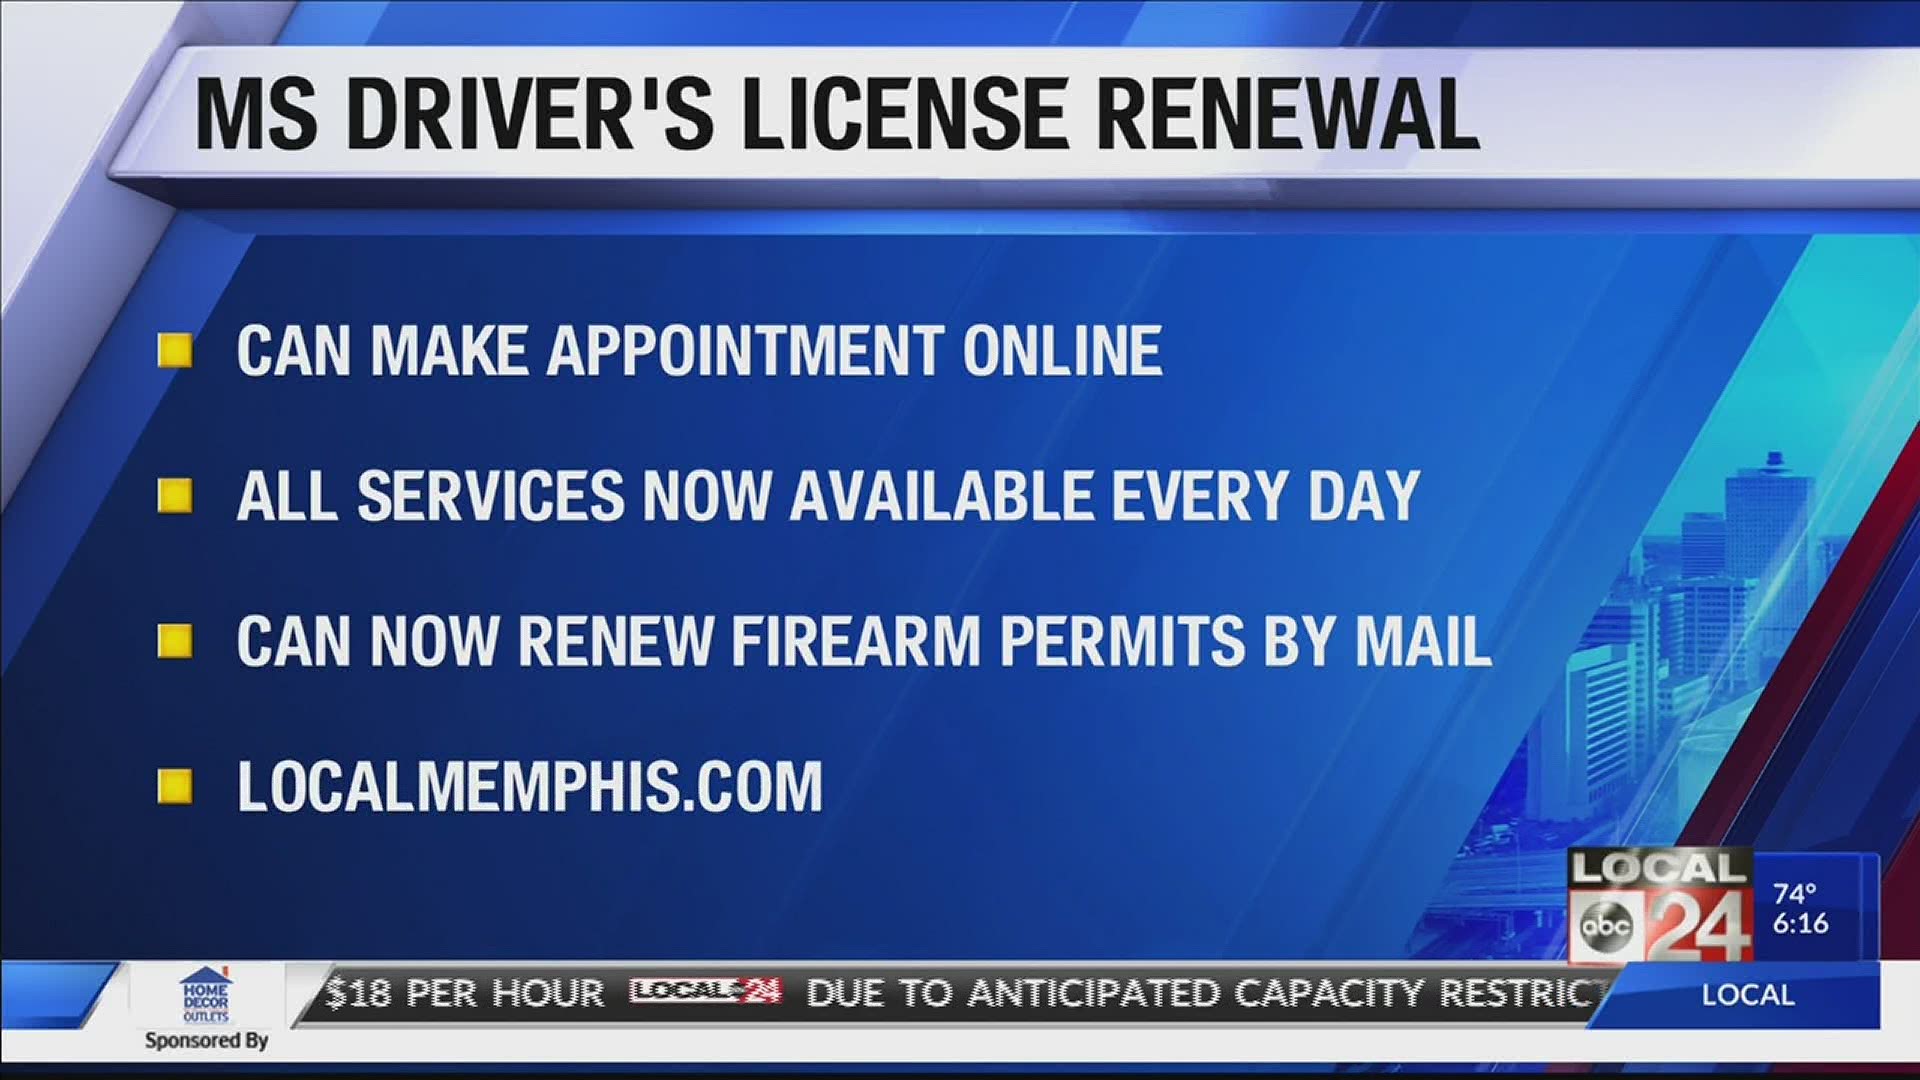 The program is aimed at reducing wait times at driver service centers around the state.